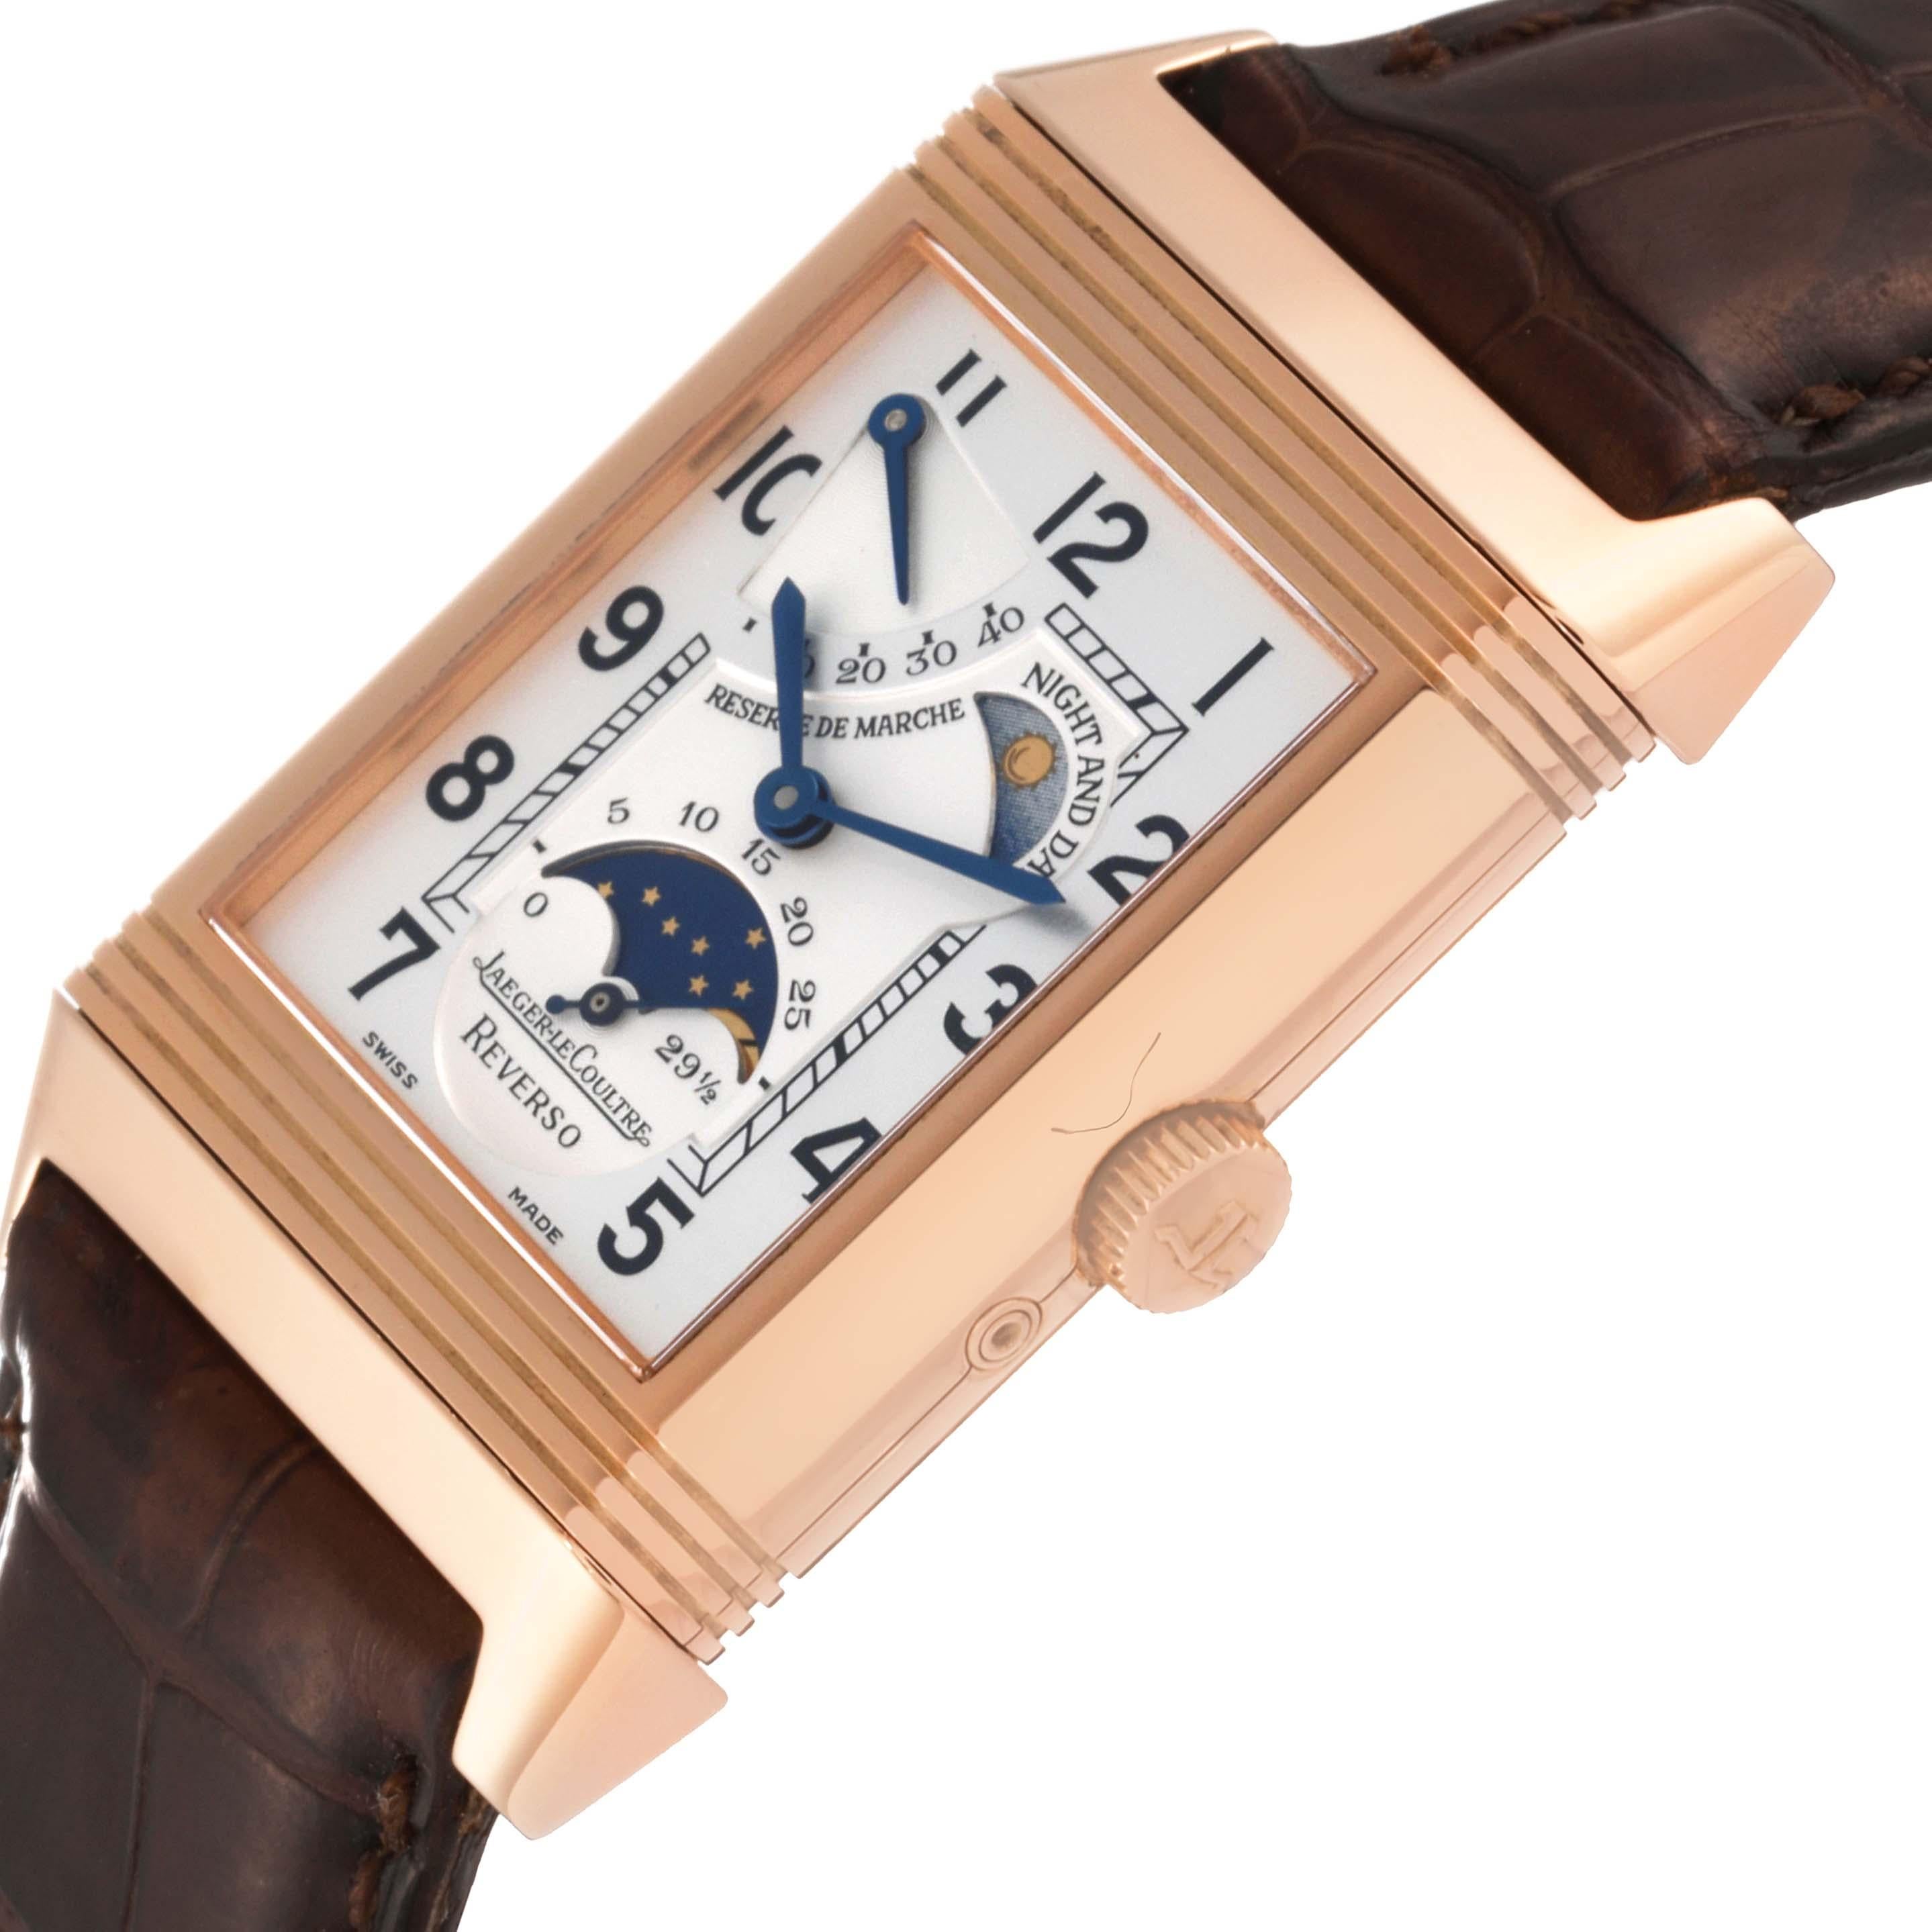 Jaeger LeCoultre Reverso Sun Moon Rose Gold Mens Watch 270.2.63 Box Papers 1